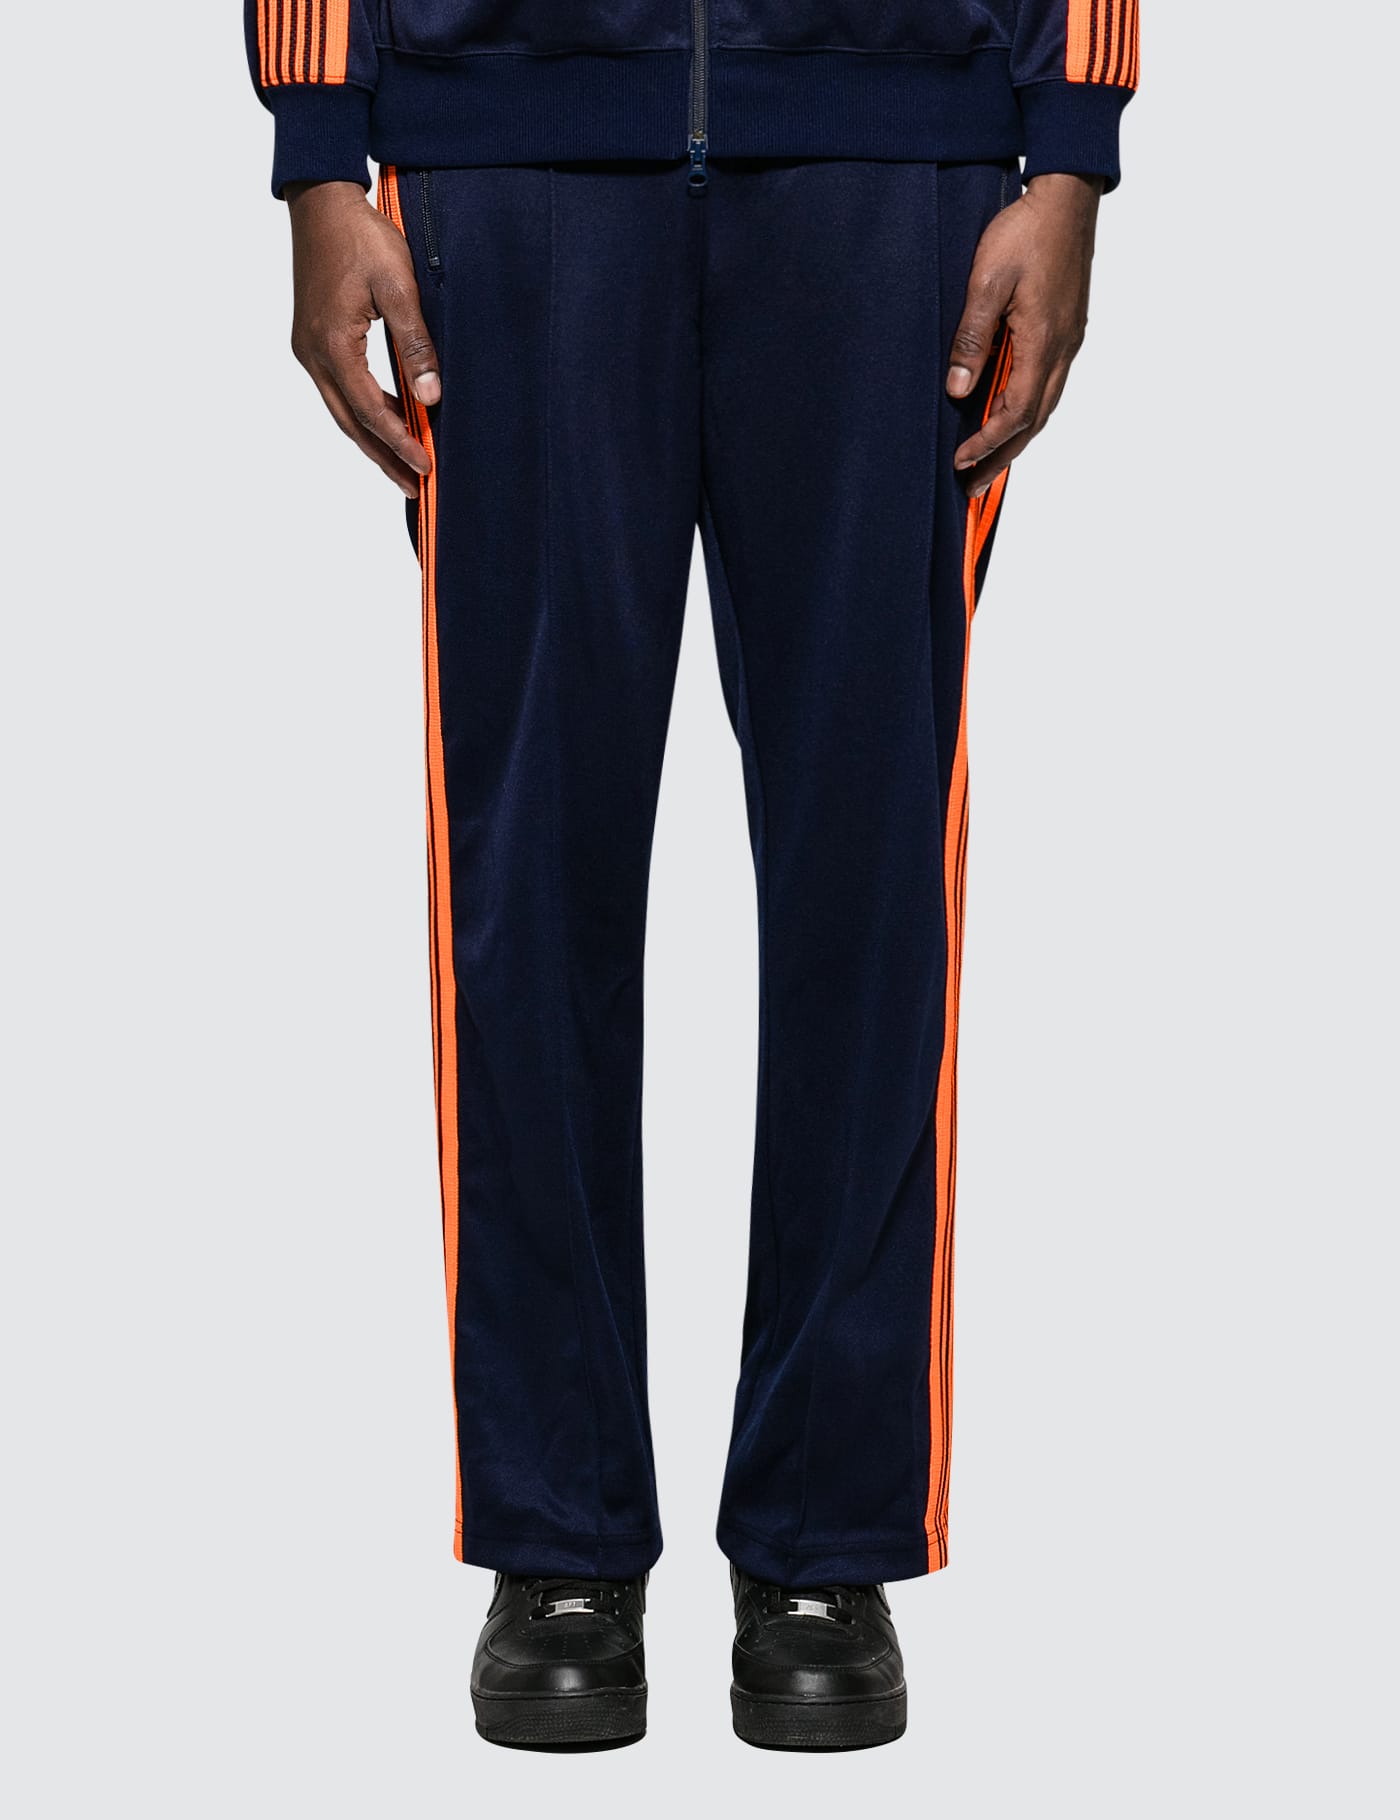 Needles - Track Pant | HBX - Globally Curated Fashion and